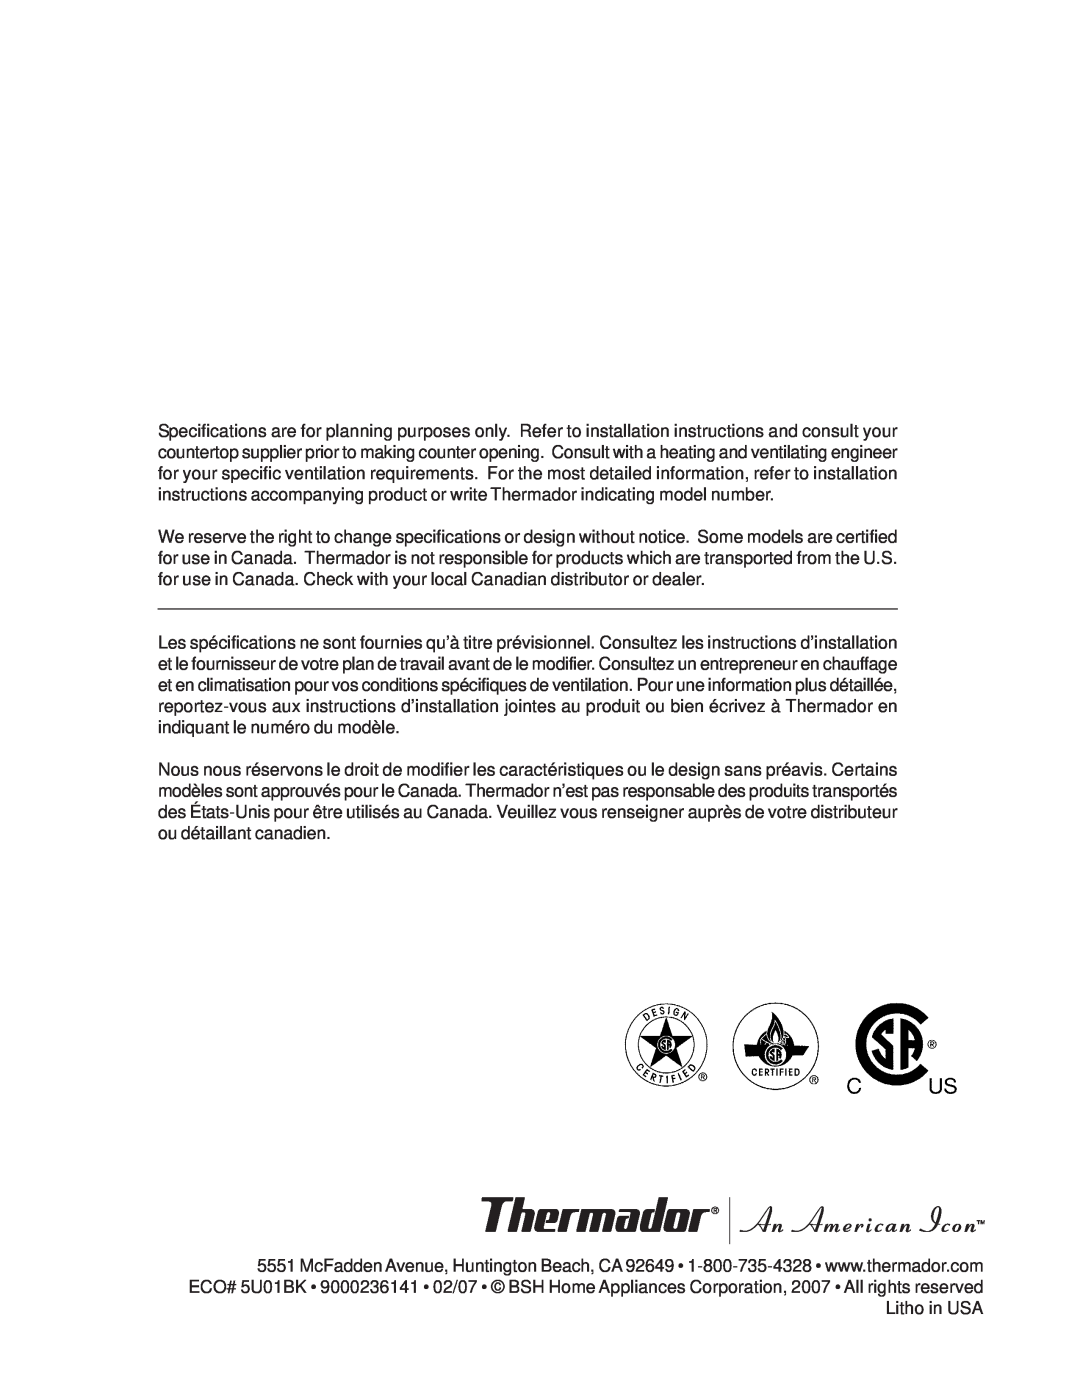 Thermador PD30, PD36, PD48 installation instructions 